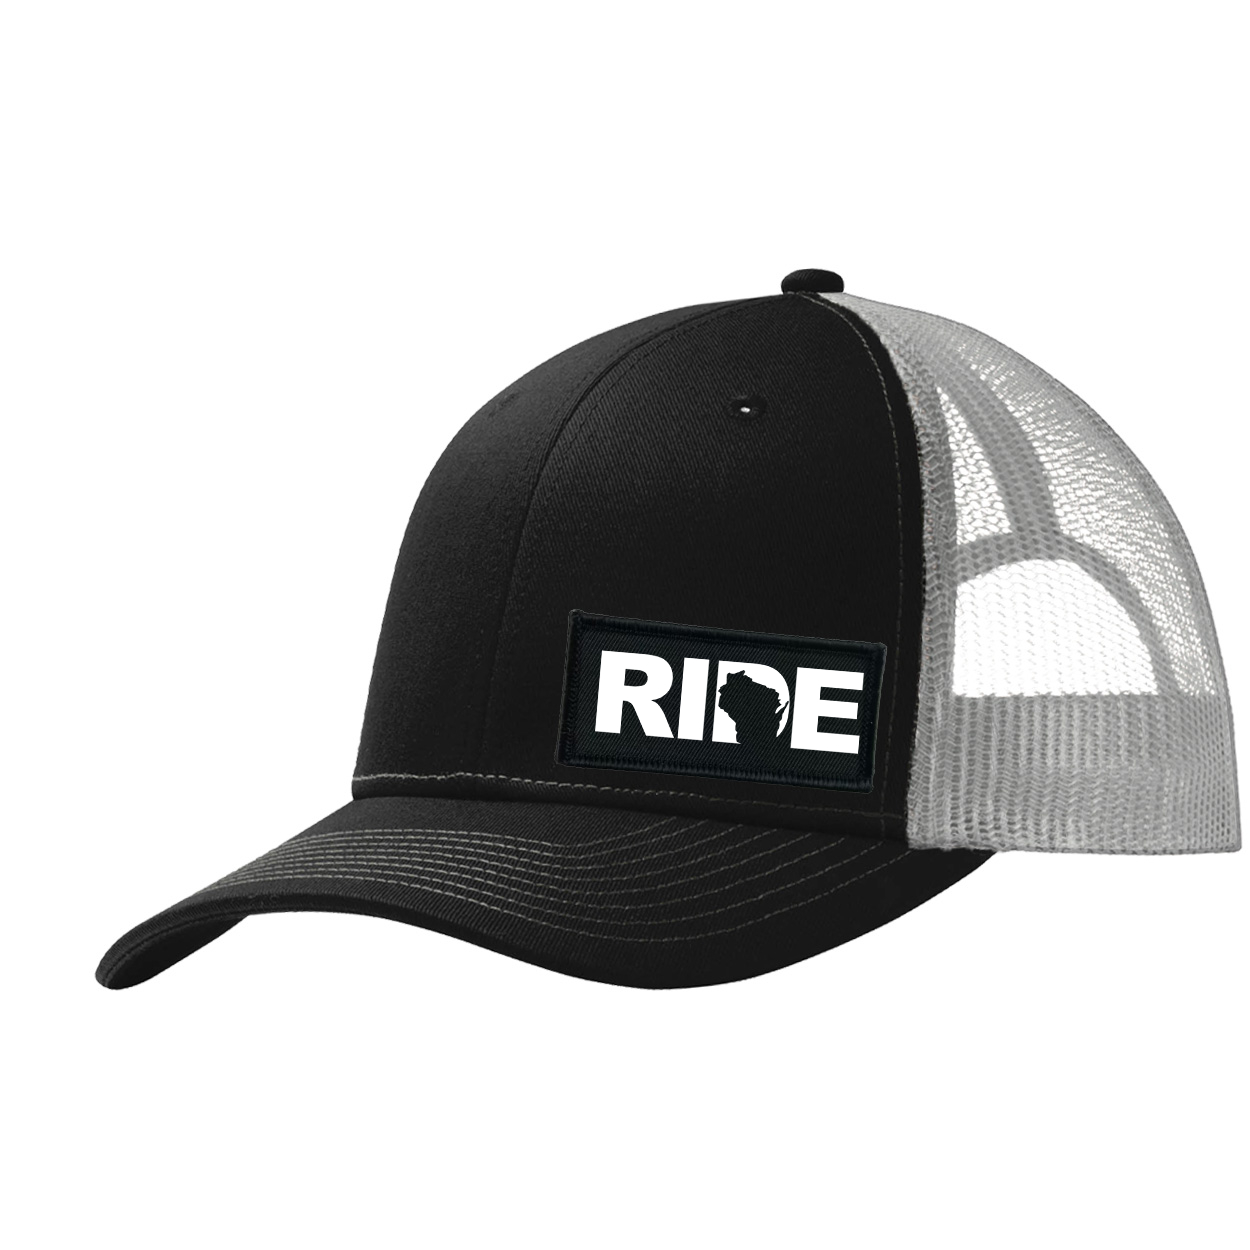 Ride Wisconsin Night Out Woven Patch Snapback Trucker Hat Black/Gray